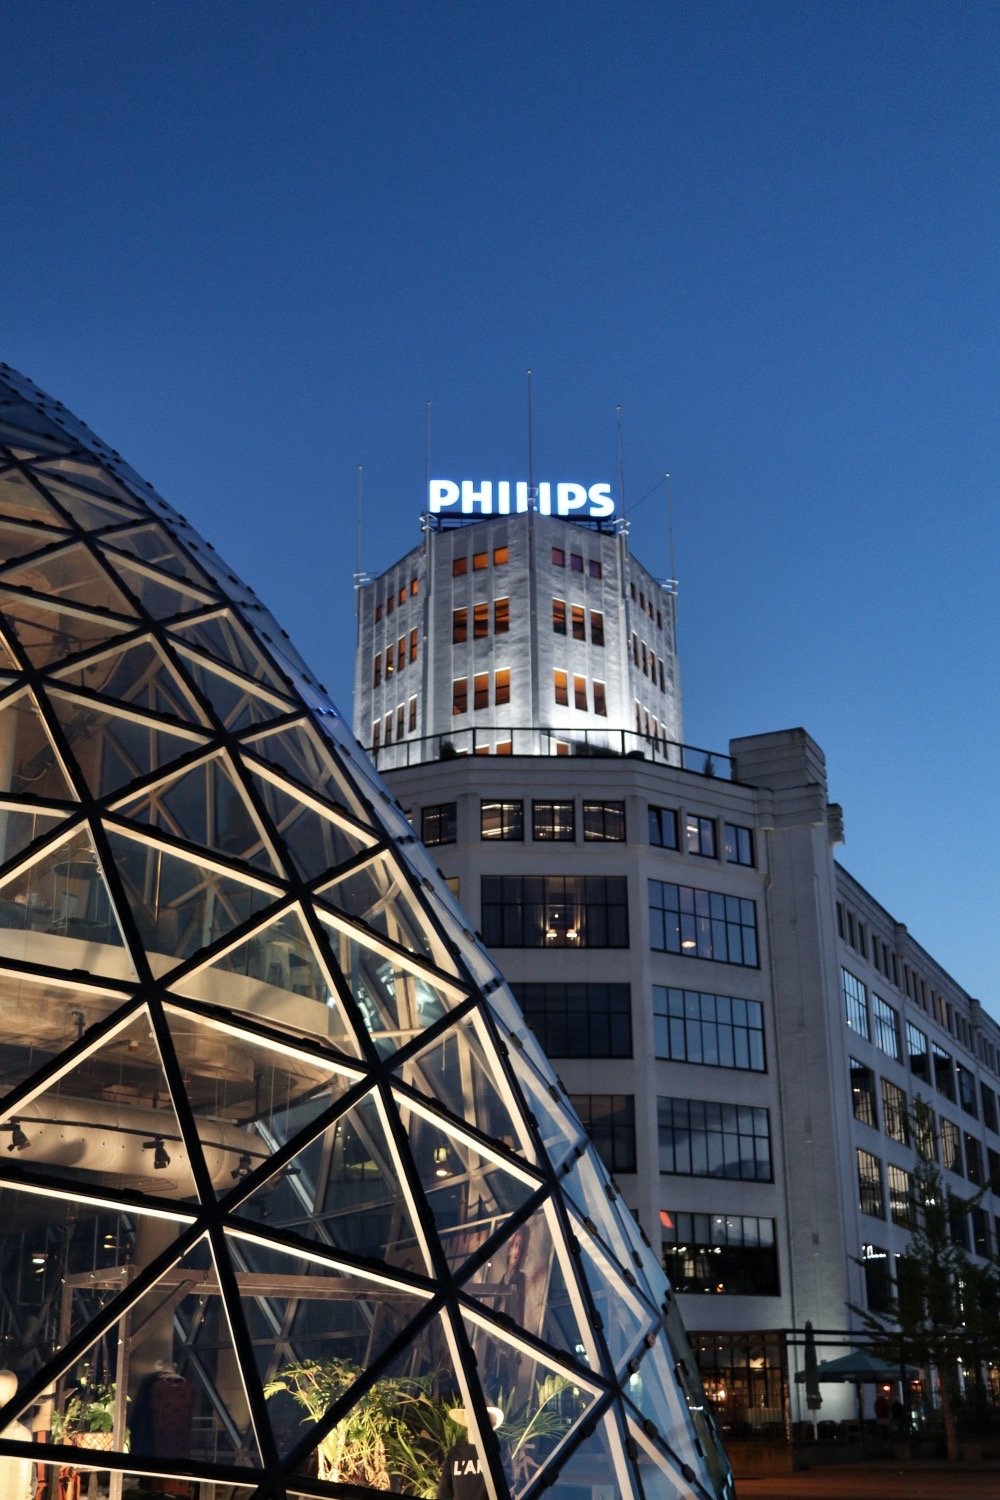 Philips Light Tower Eindhoven